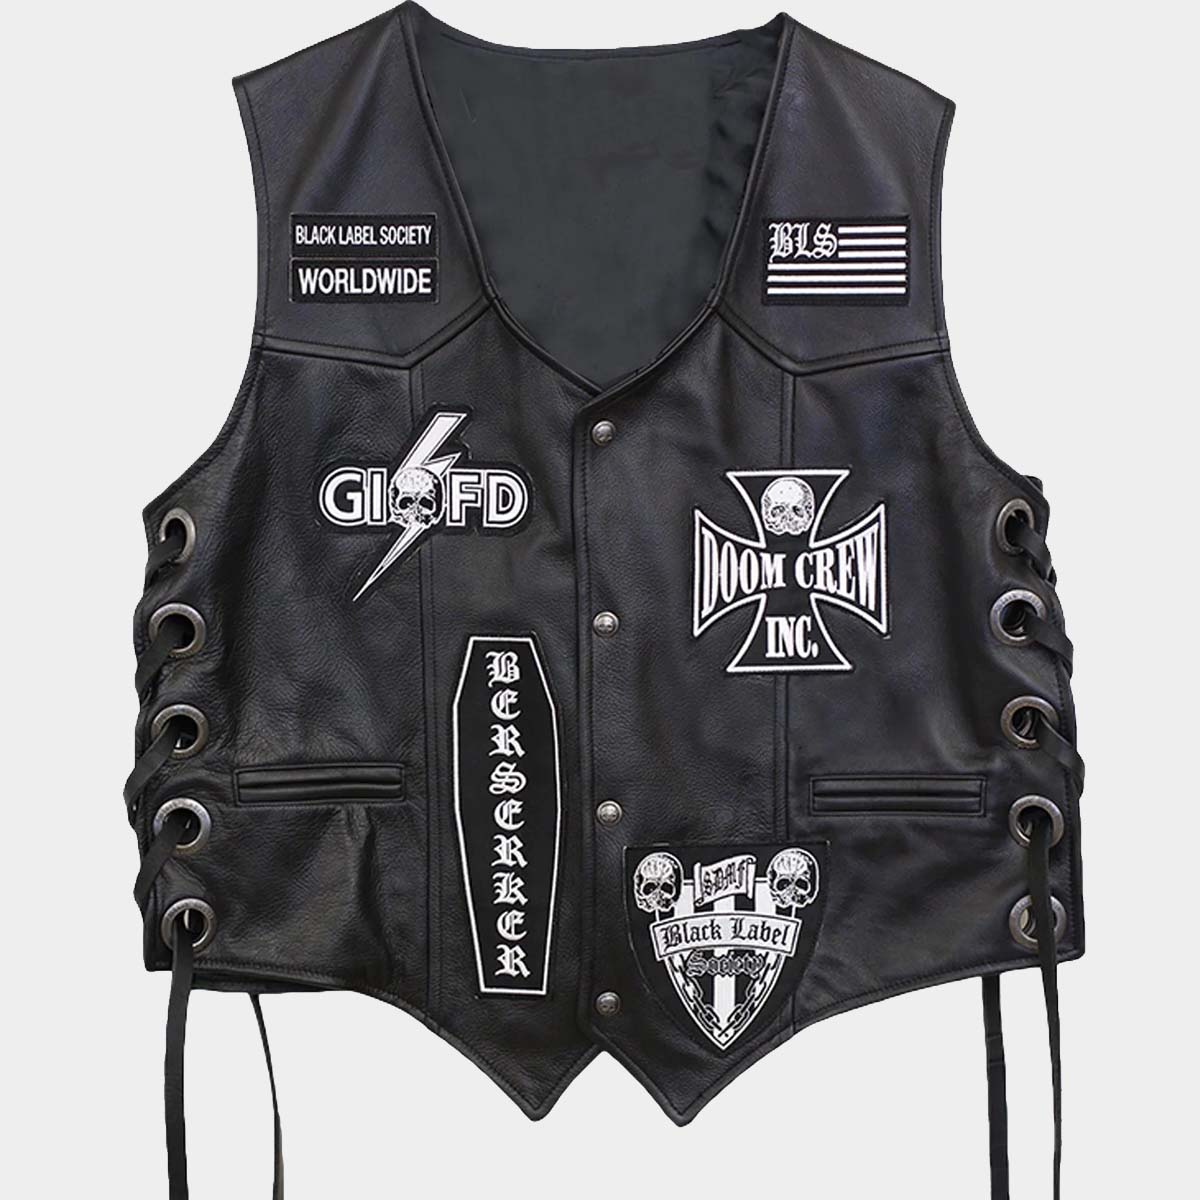 black leather vest inspired from Black Label Society heavy metal band formed in Los Angeles